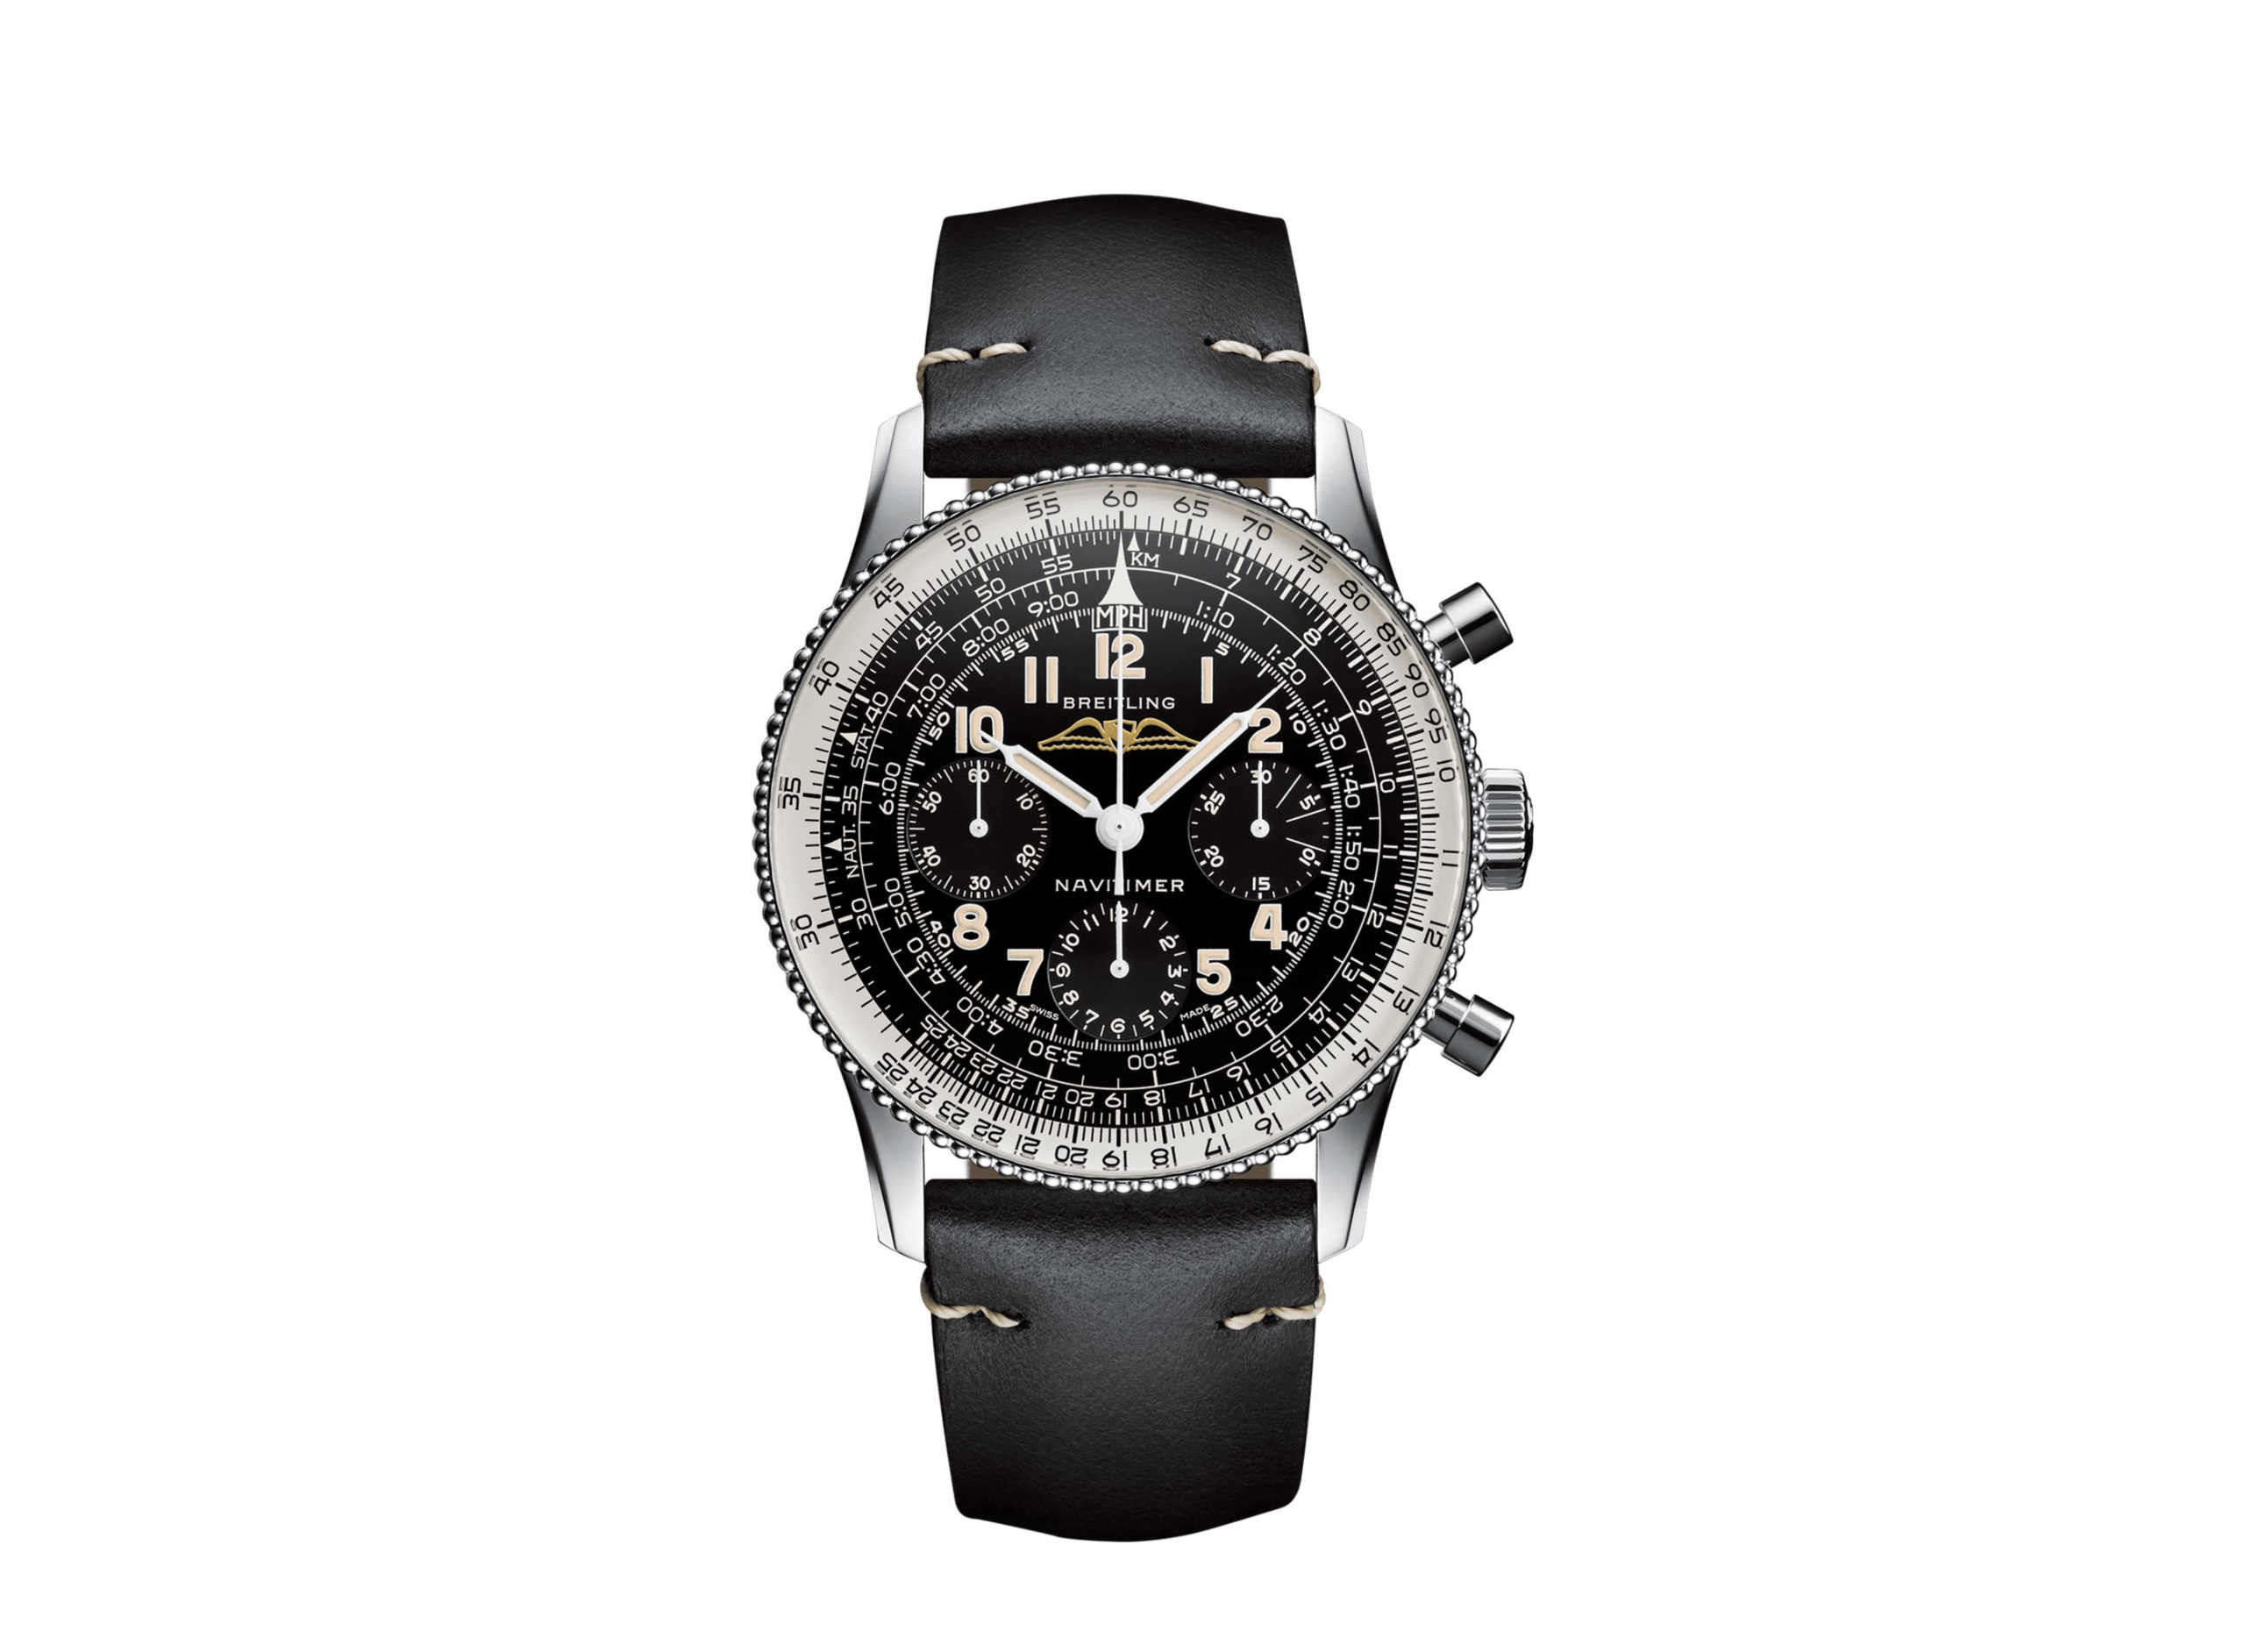 The Breitling Navitimer Ref. 806 1959 Re-Edition